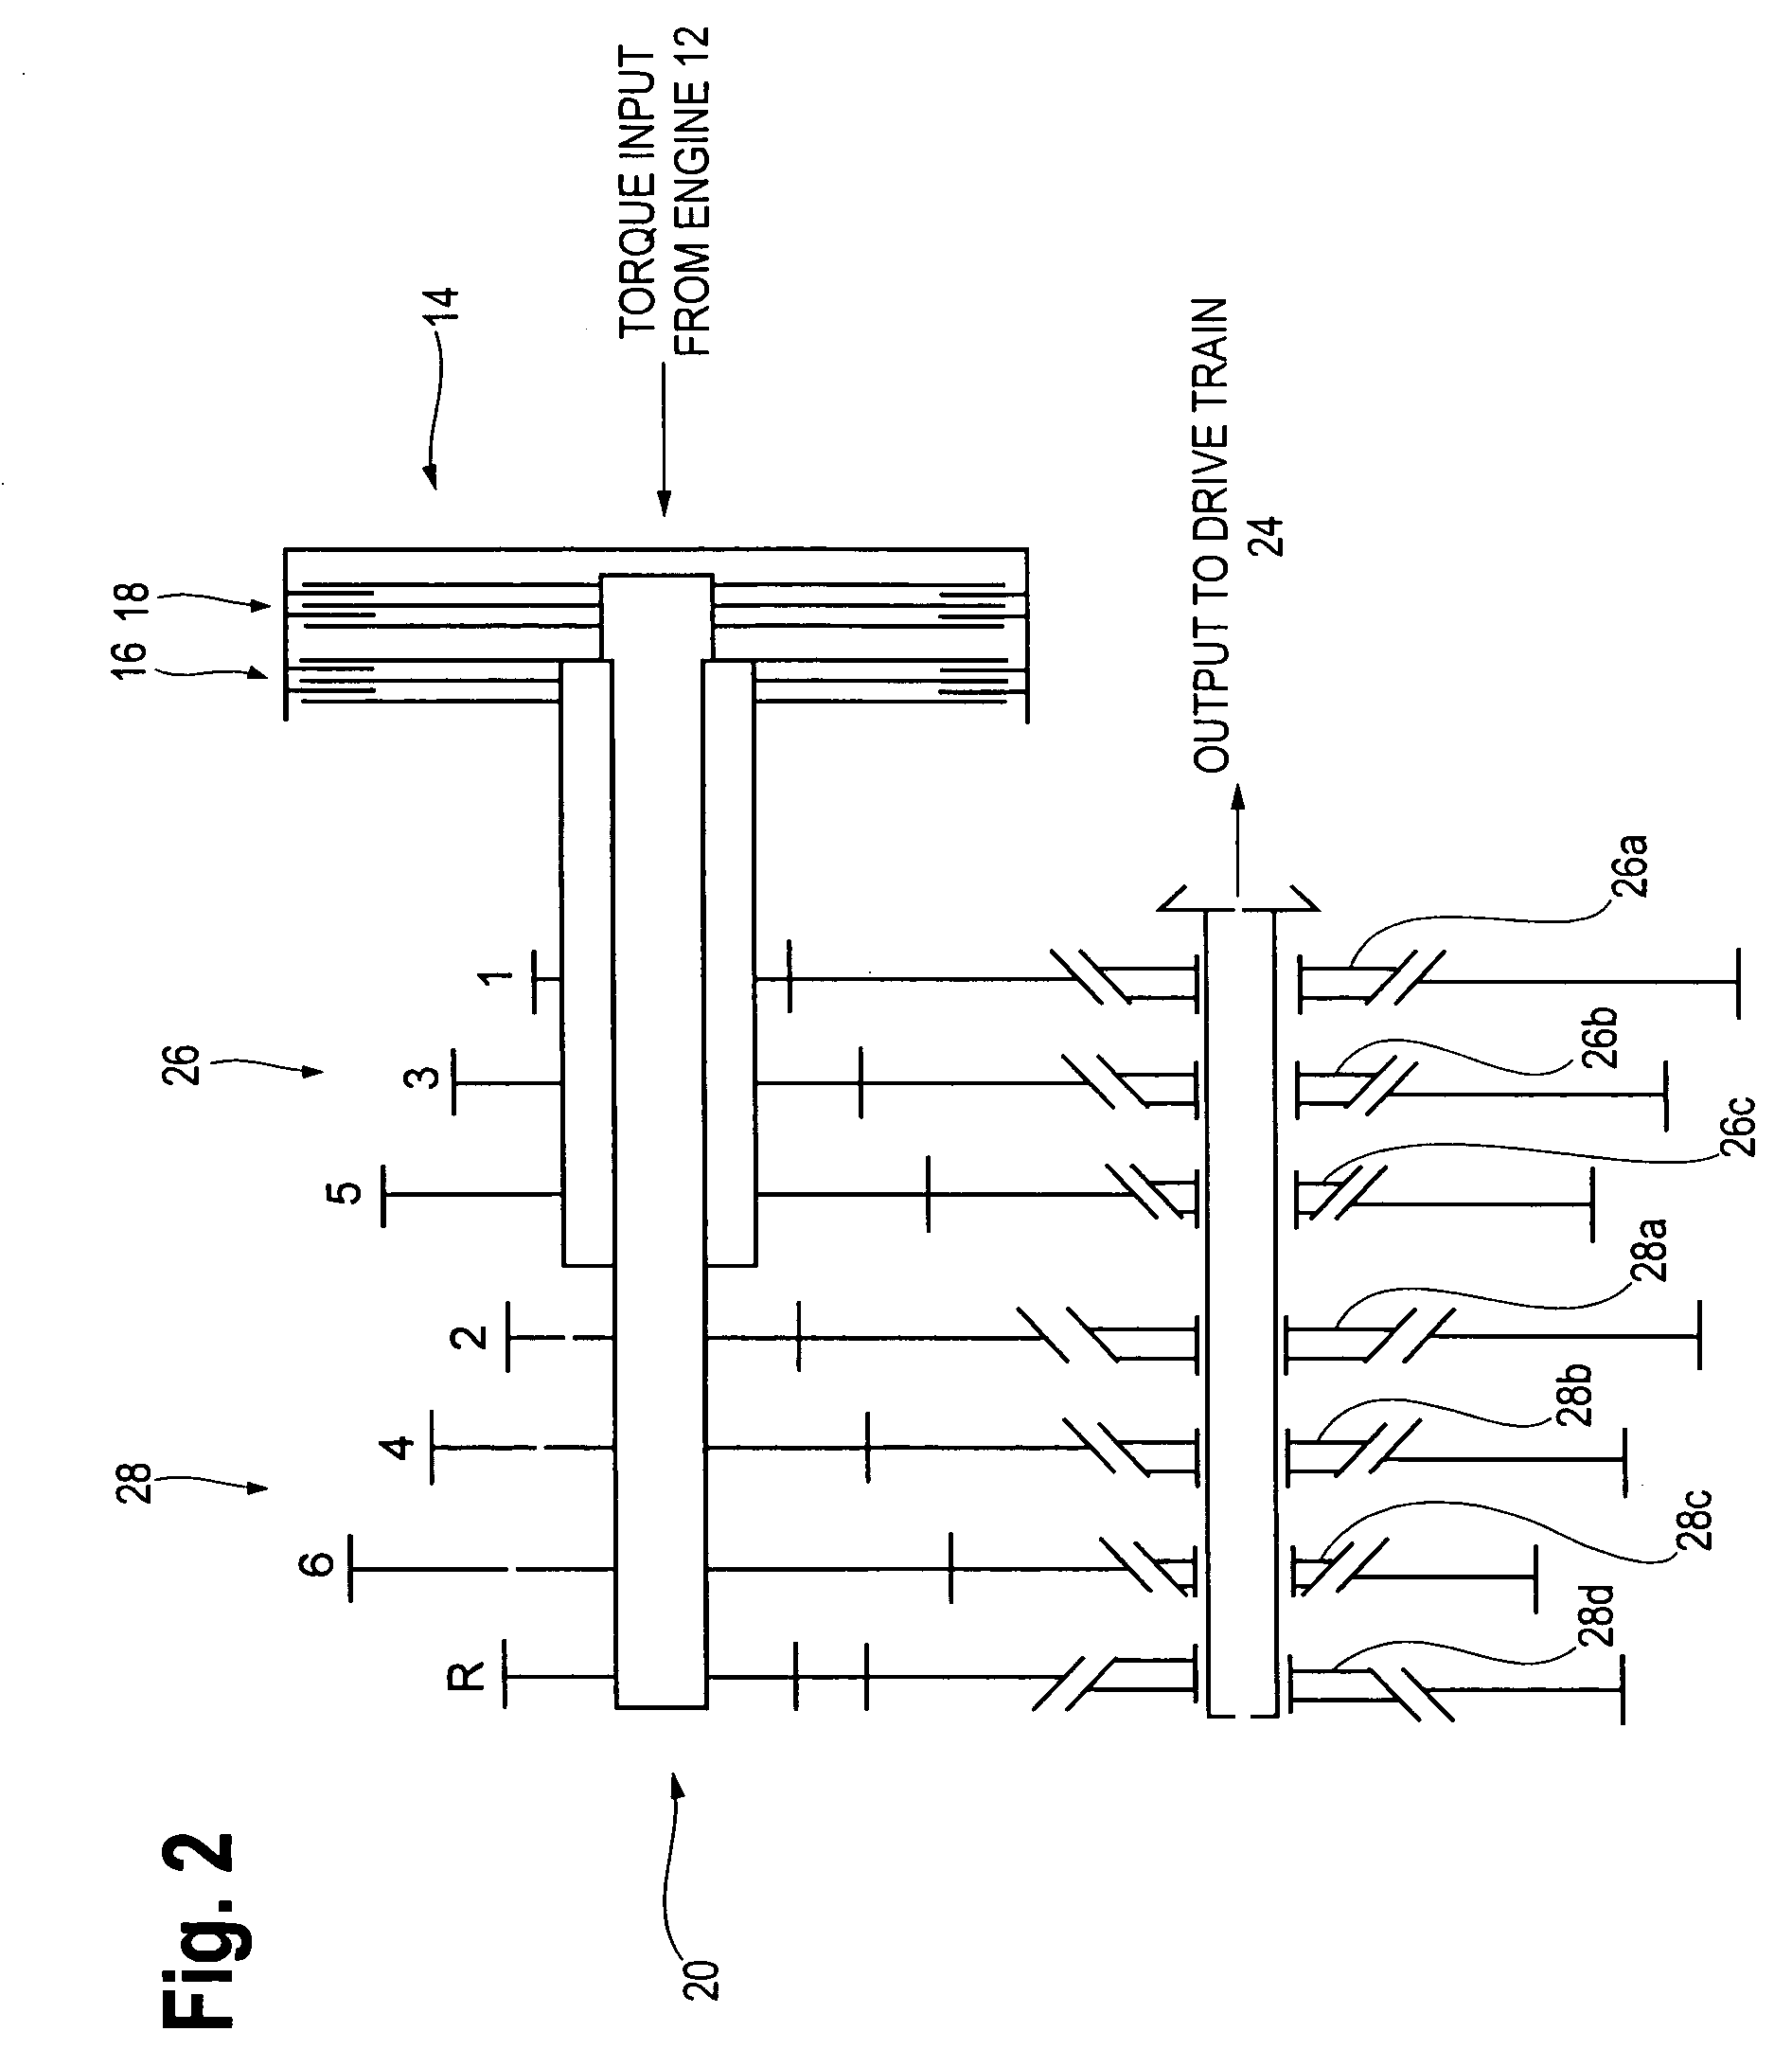 Multi-clutch system with blended output system for powertrain transmissions